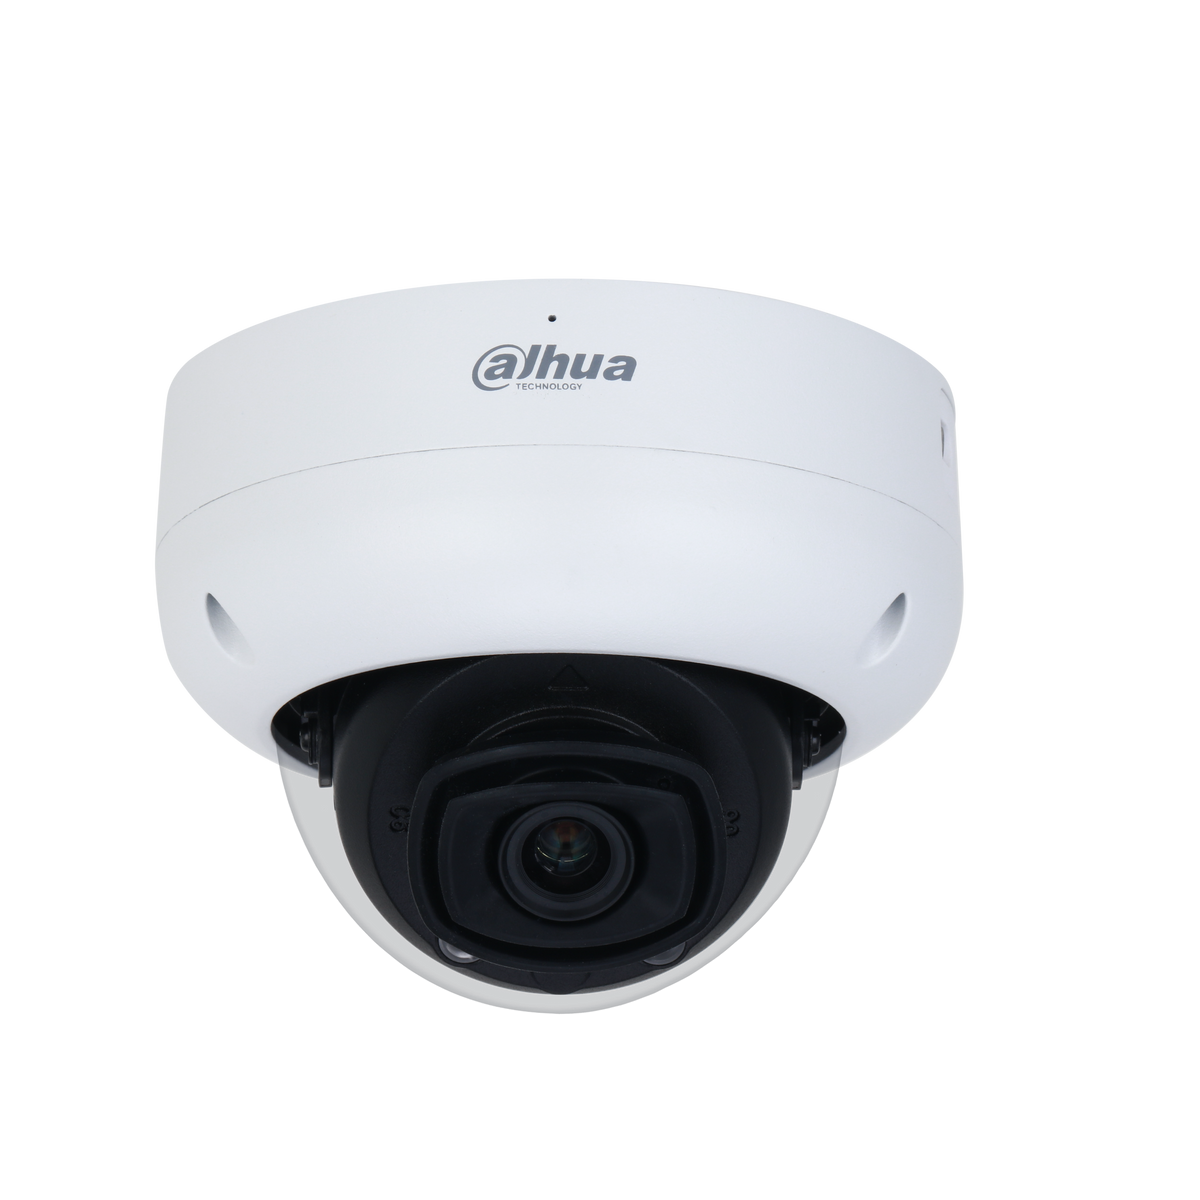 DAHUA IPC-HDBW5449R-ASE-LED 4MP Full-color Fixed-focal Warm LED Dome WizMind Network Camera